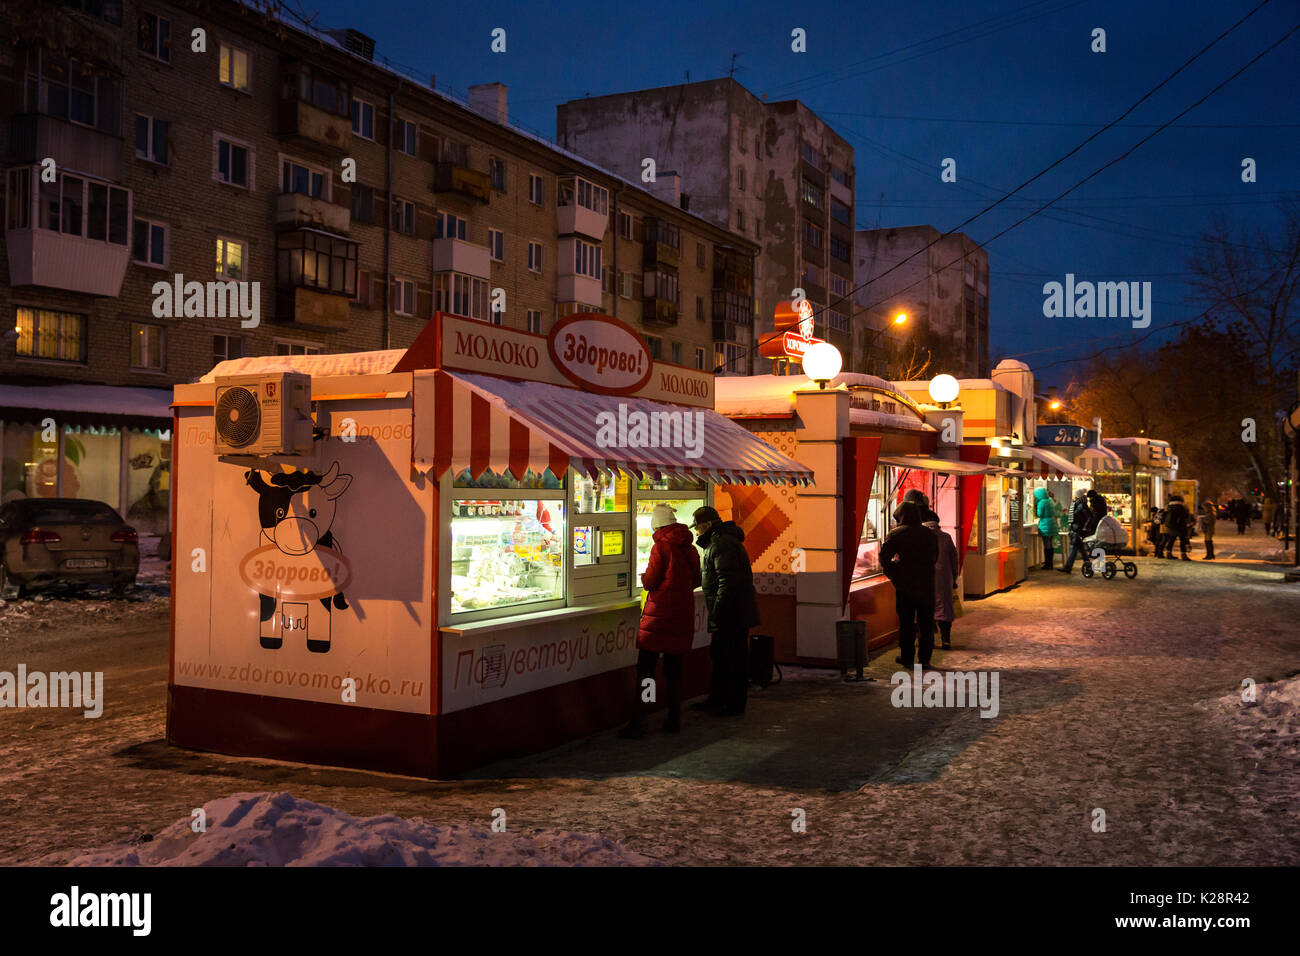 Street scenes in the evening in Yekaterinburg. The beautiful appearance is tantamount to the fact that it is regarded as AIDS and drug capital. Stock Photo